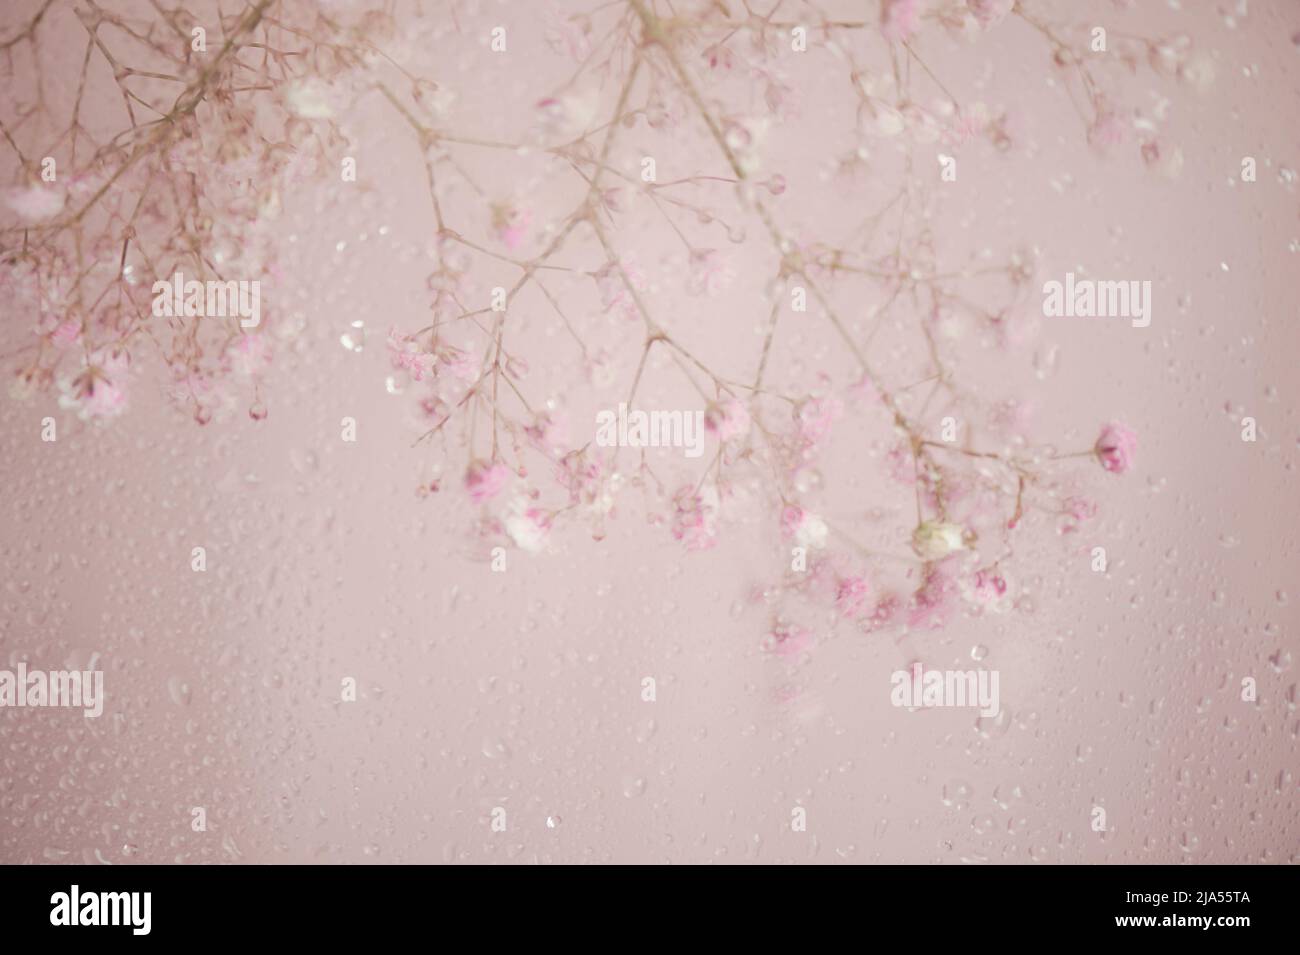 A branch of gypsophila on a pink background, blurred behind wet glass. Abstraction. Stock Photo